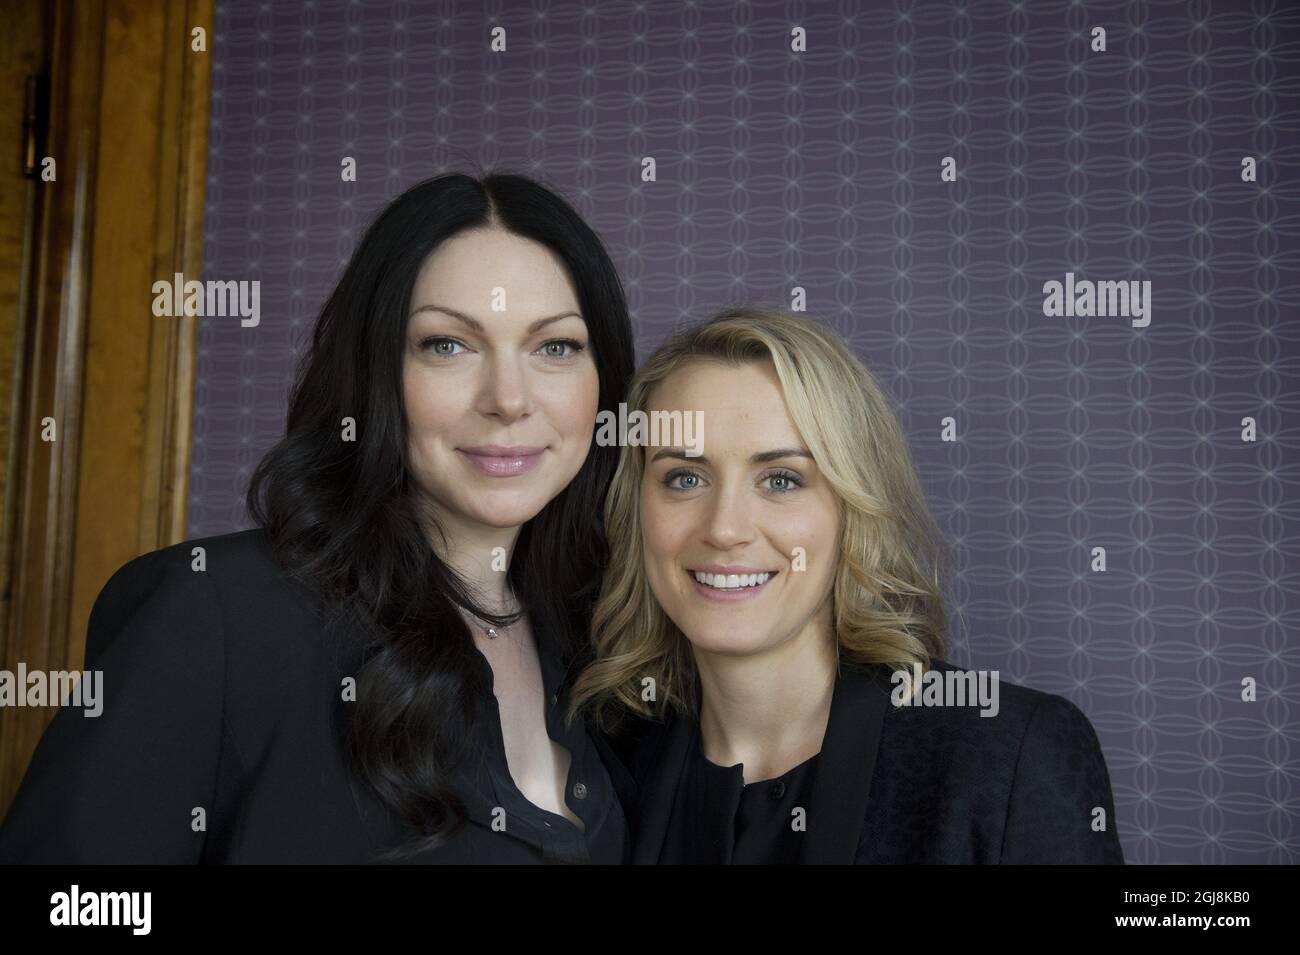 STOCKHOLM 20140602 US actresses Laura Prepon and Taylor Schilling stars from Netflix series 'Orange is the new black' . Foto: Jessica Gow / TT / Kod 10070  Stock Photo